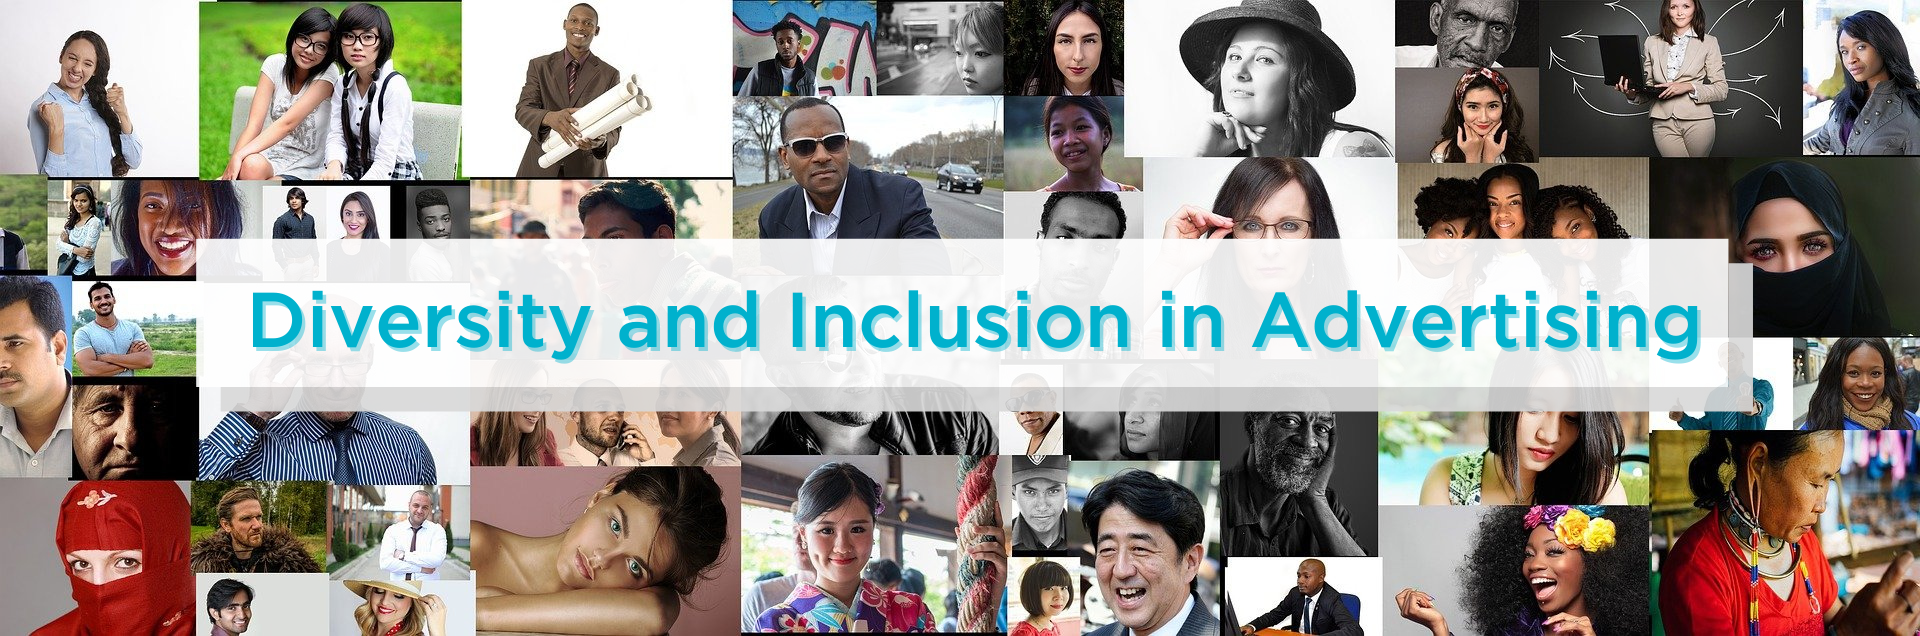 Diversity and Inclusion in Advertising Cover